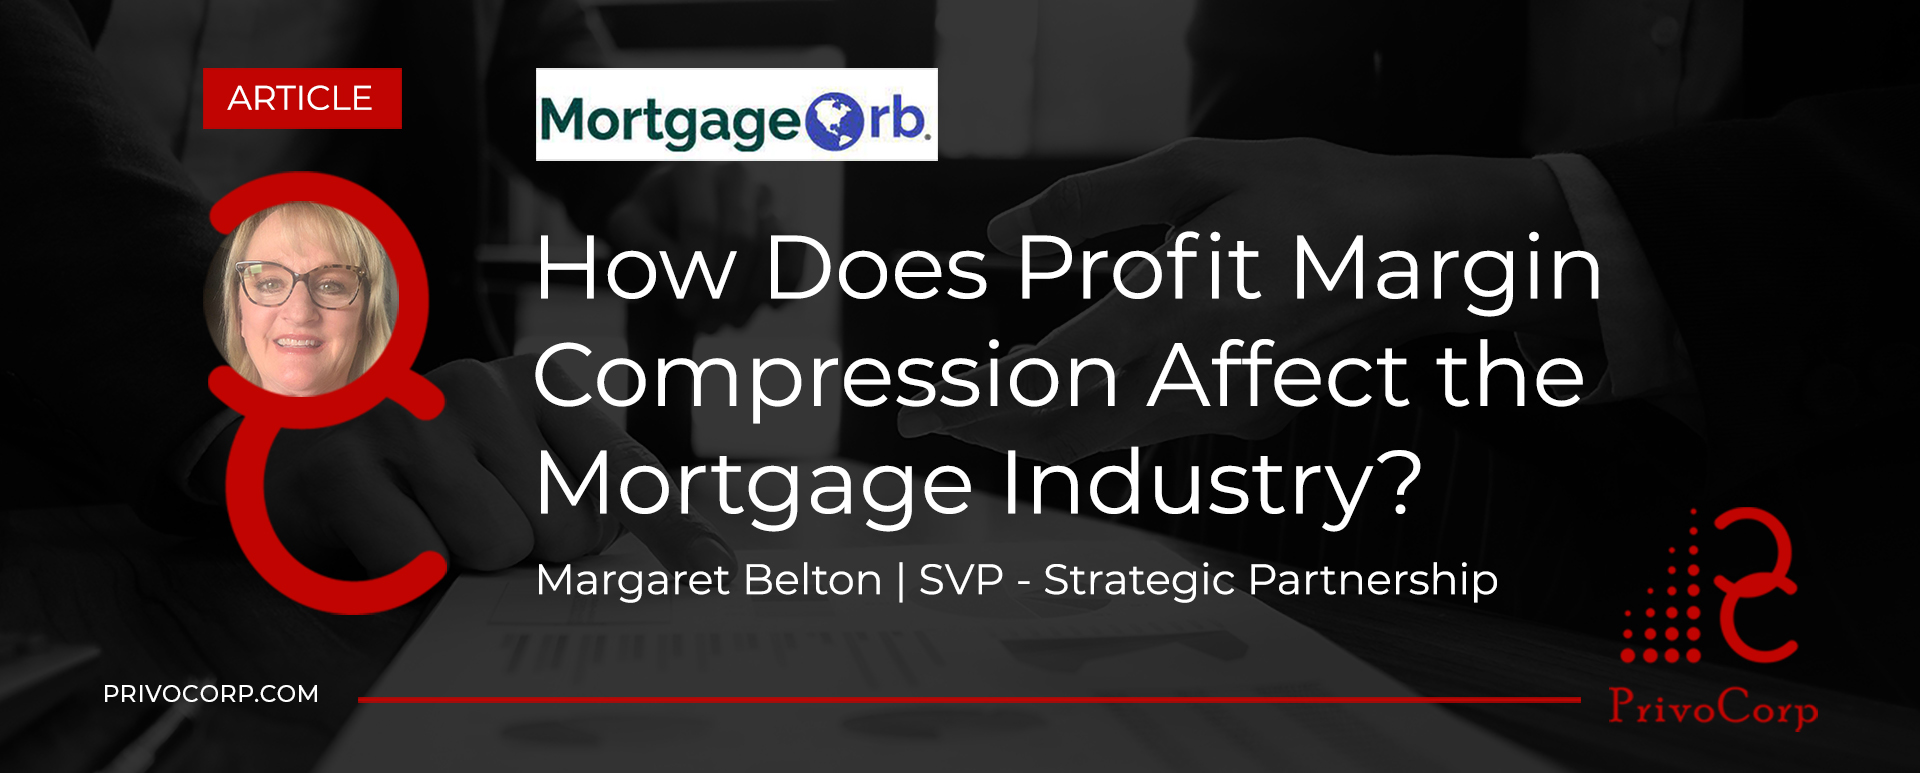 How Does Profit Margin Compression Affect the Mortgage Industry?